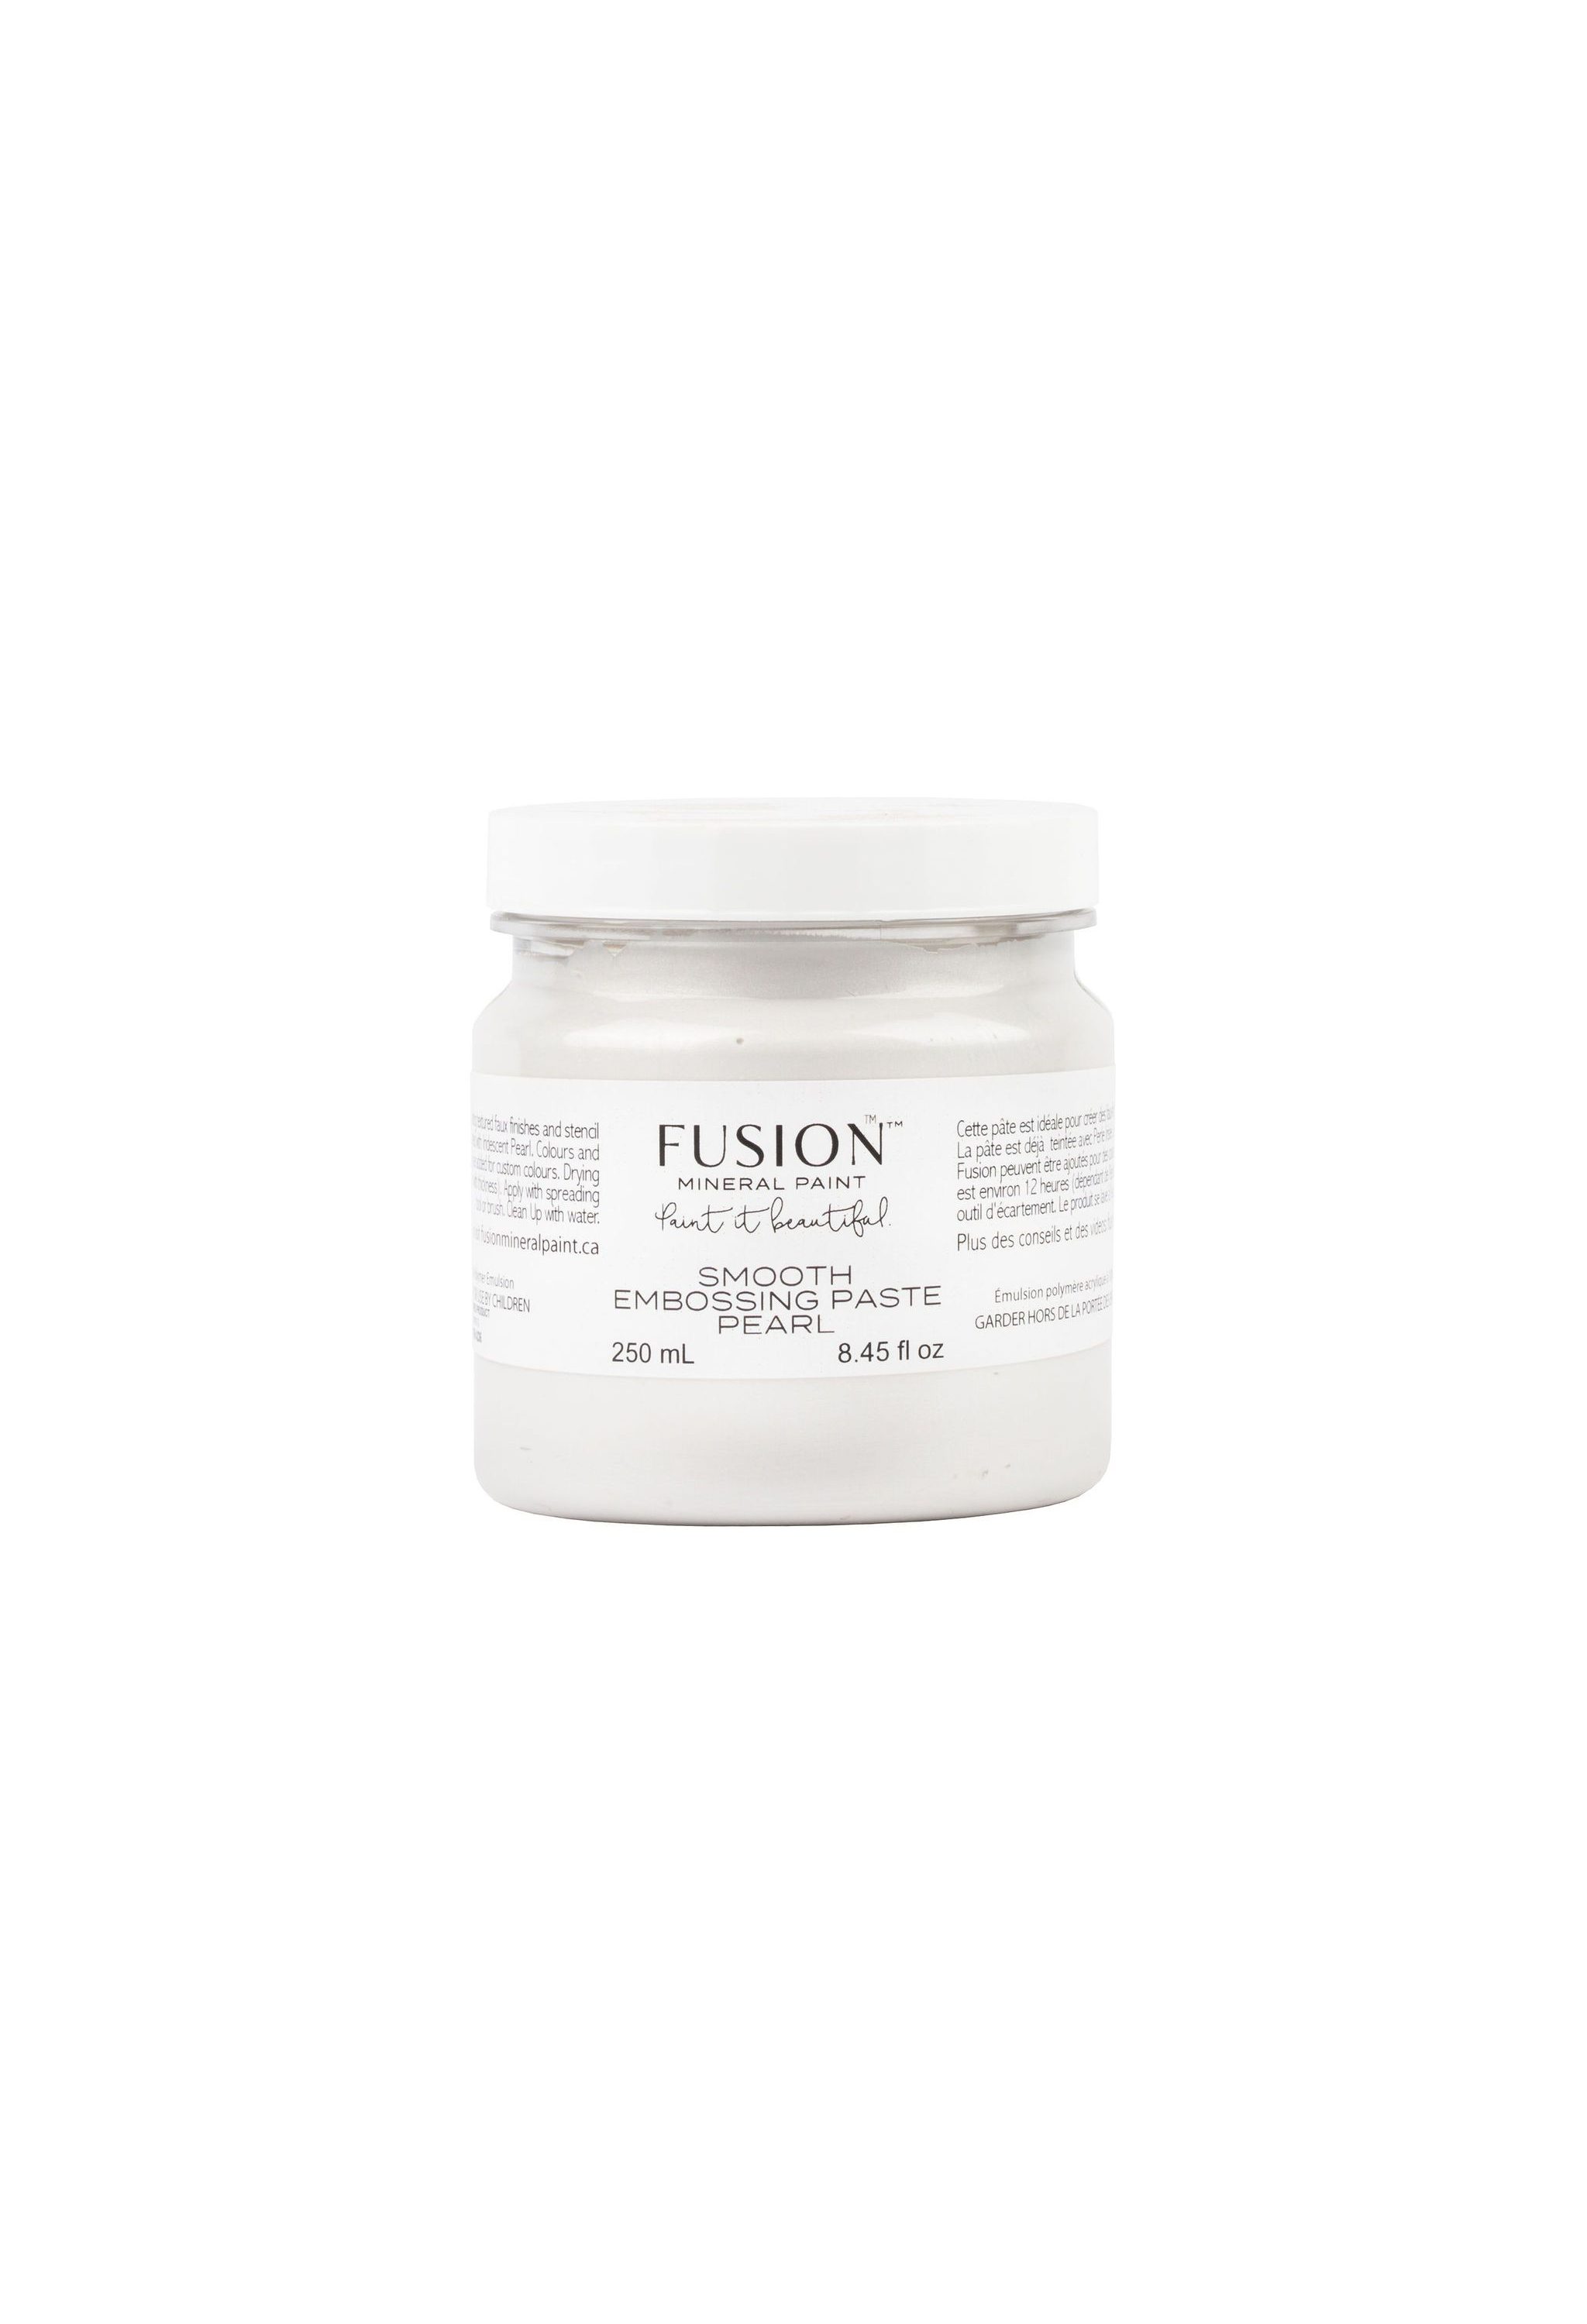 Fusion Mineral Paint vernice ecologica embossing paste